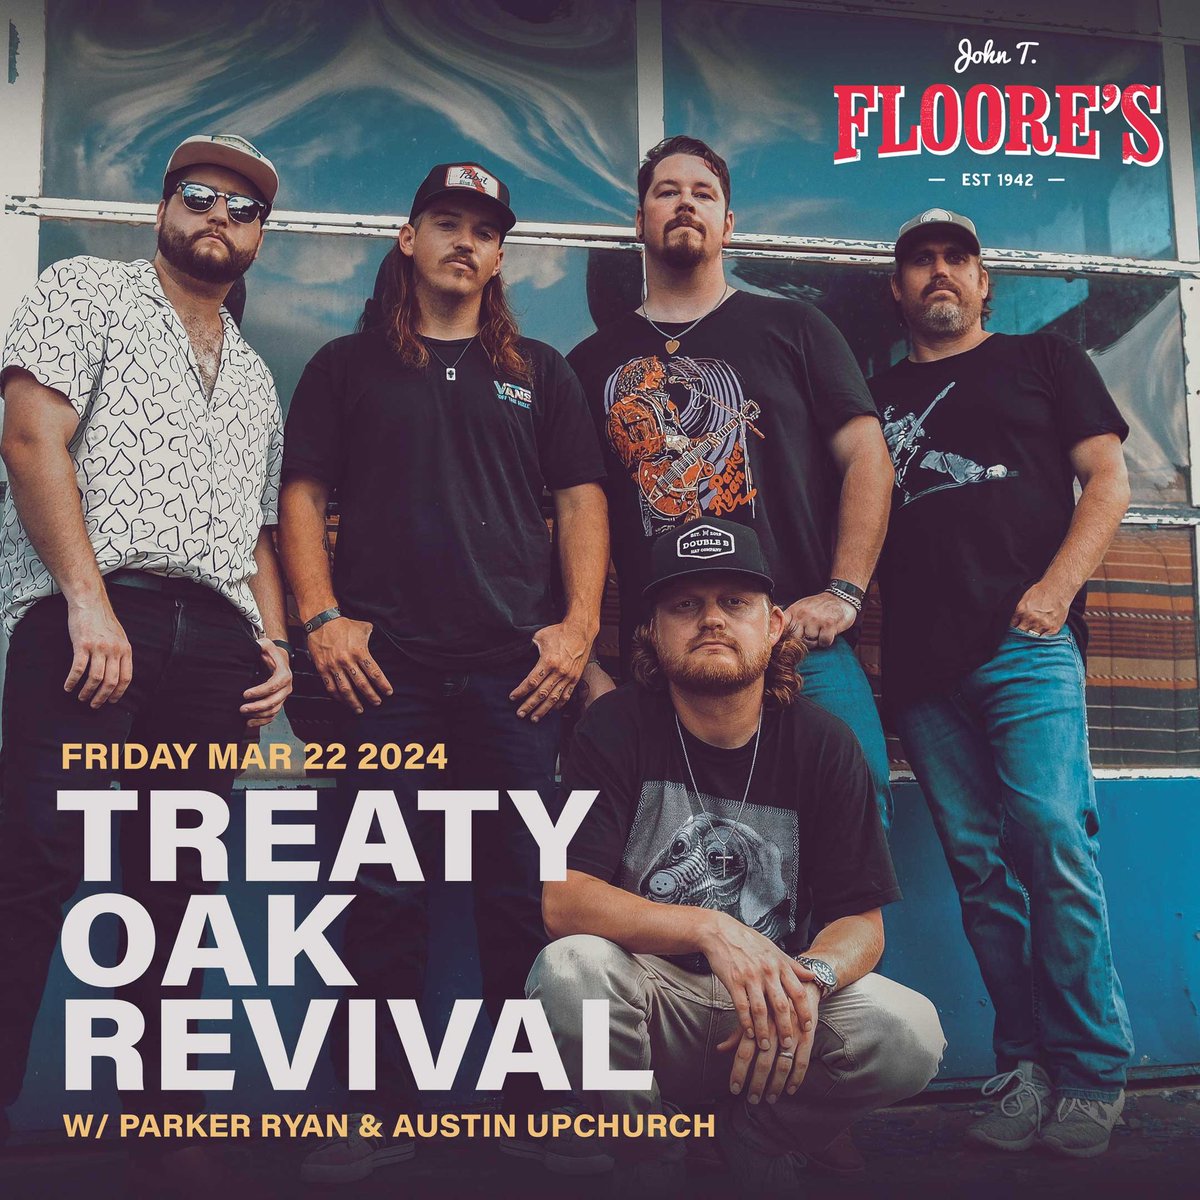 Due to overwhelming demand the @TreatyOakMusic show scheduled for March 22nd will now happen on the outdoor stage with special guests @ParkerRyanMusic & Austin Upchurch. Previously purchased tickets will still be valid. If you need tickets, get yours here: bit.ly/4b3q99M